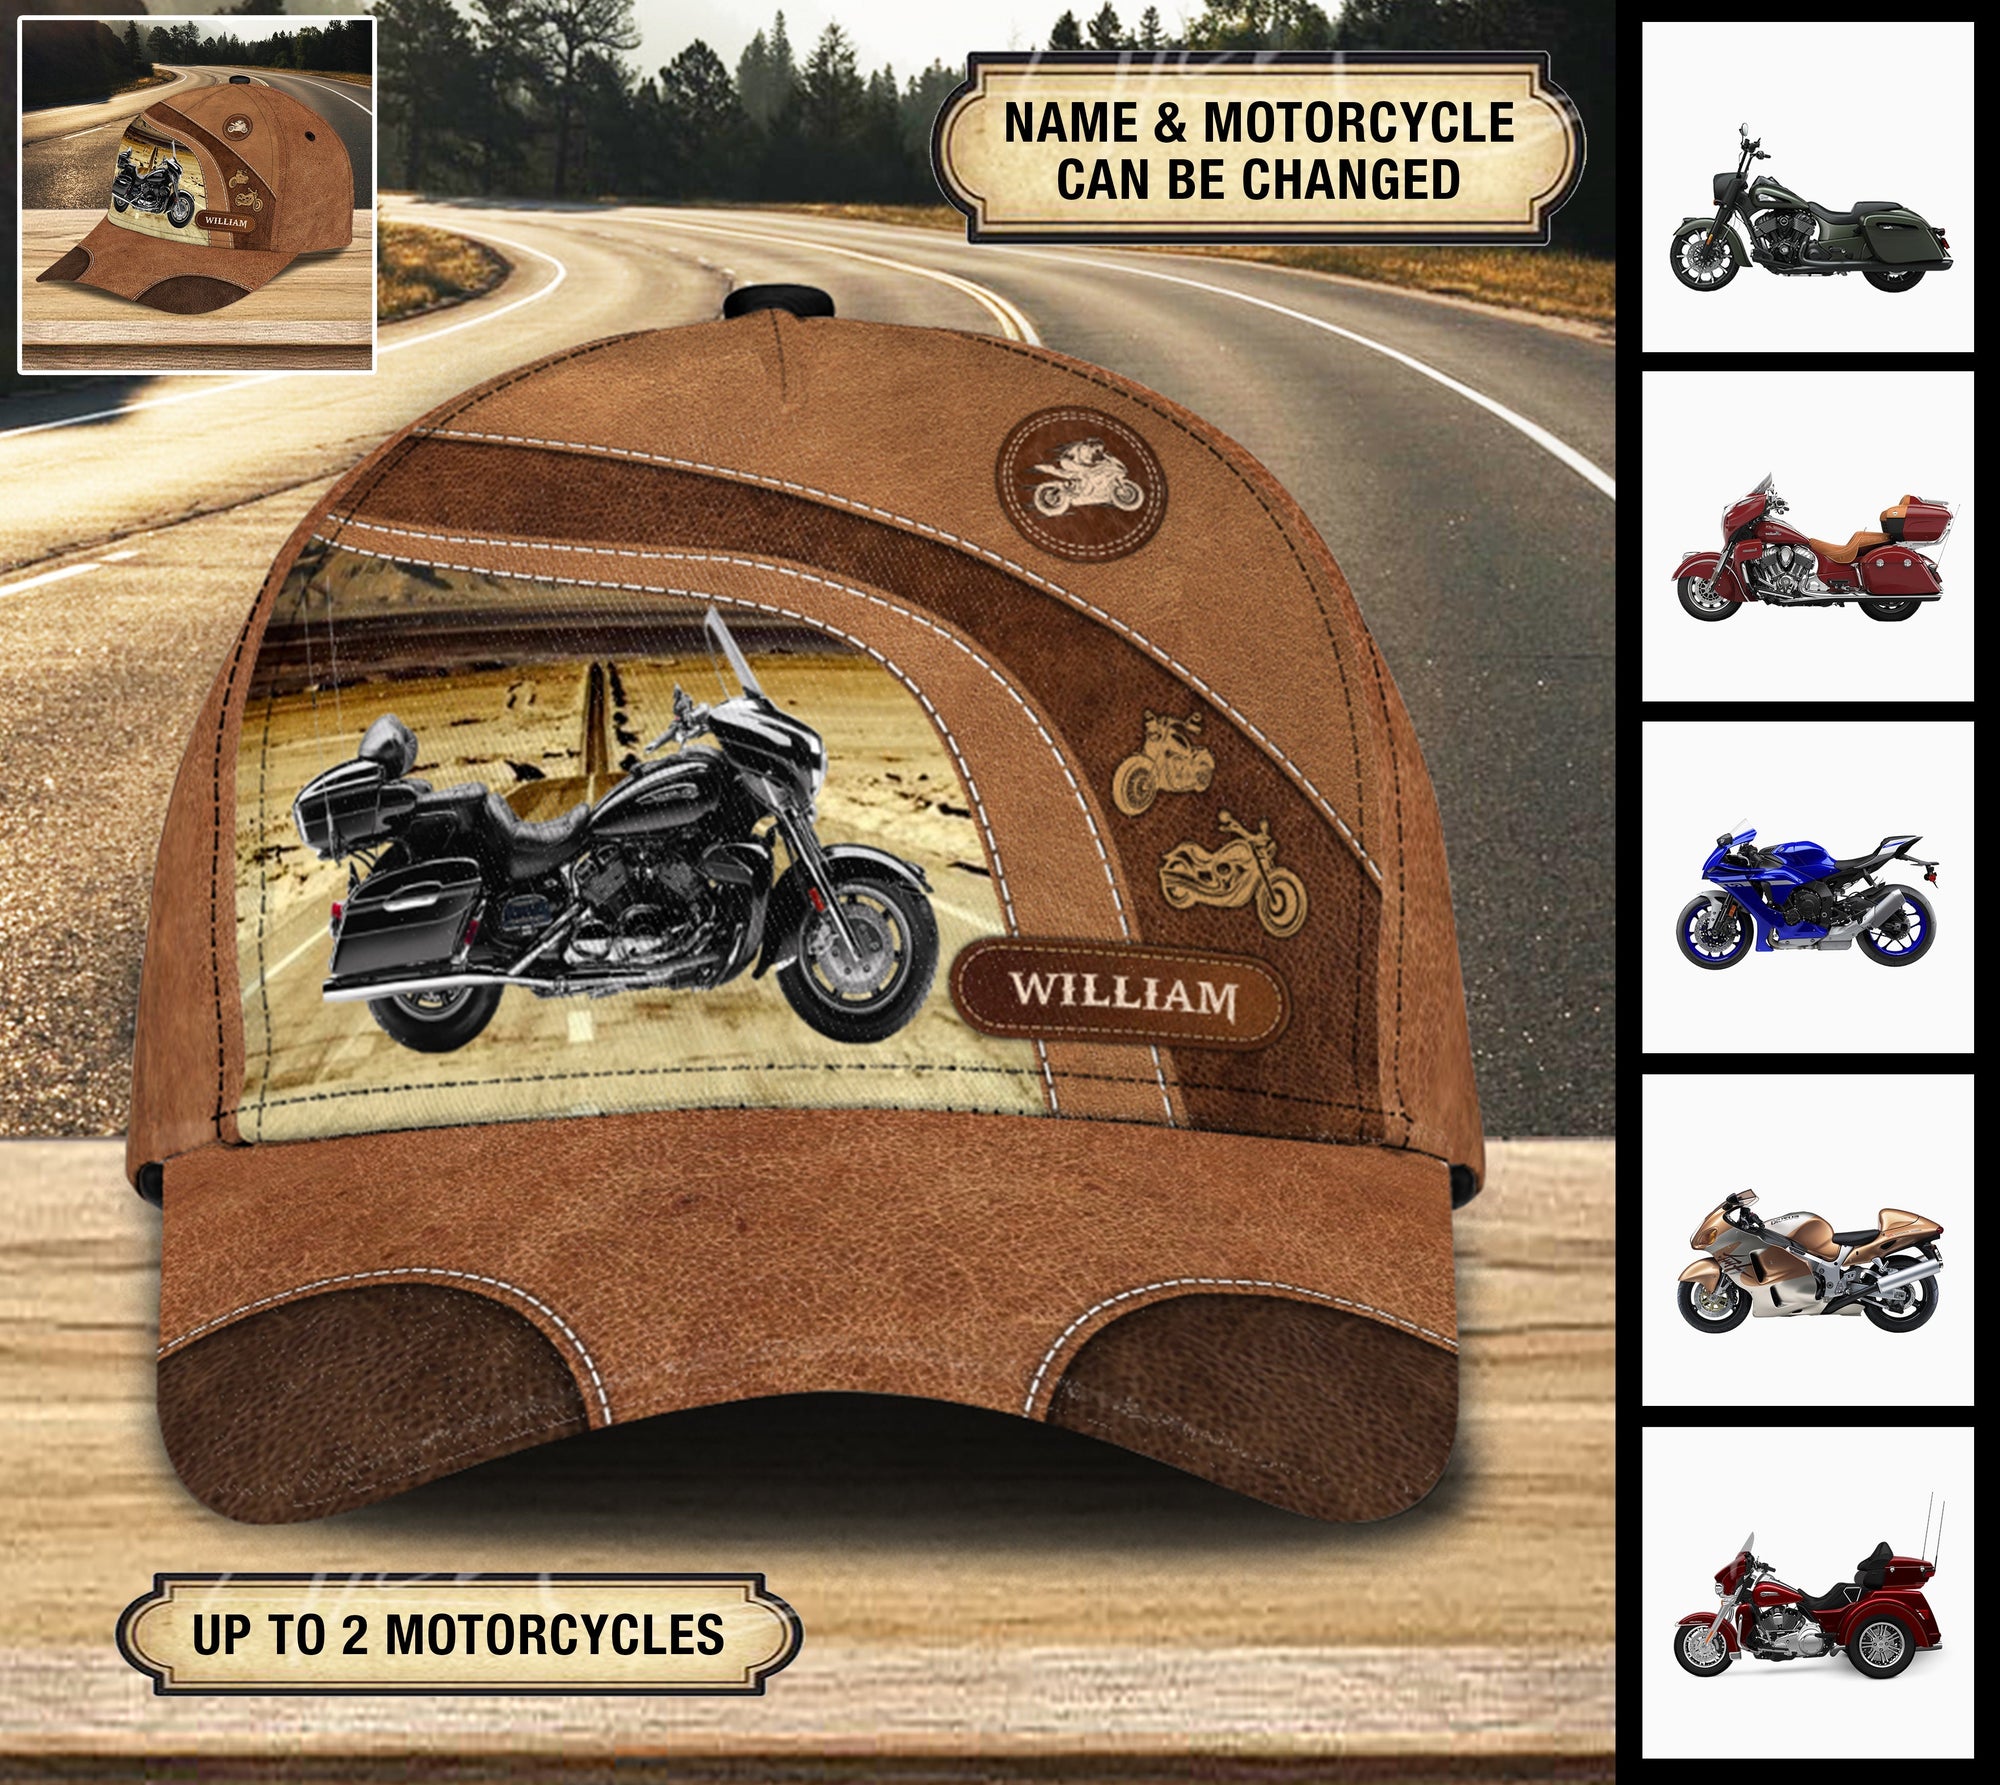 Motorcycle With Highway Background Personalized Classic Cap